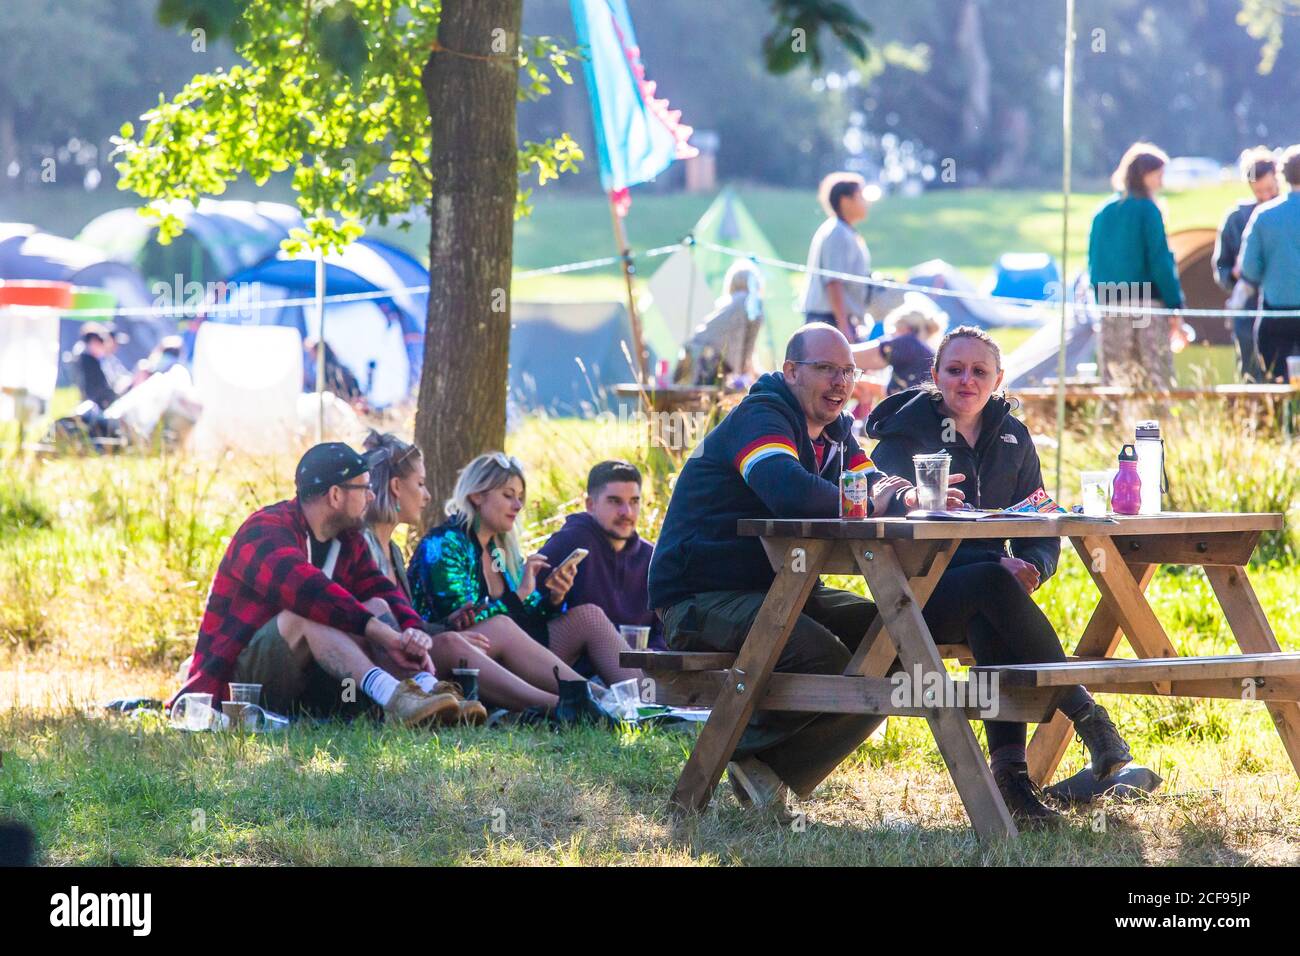 We Are Not a Festival socially distanced event in Pippingford Park - camping with a festival vibe Stock Photo